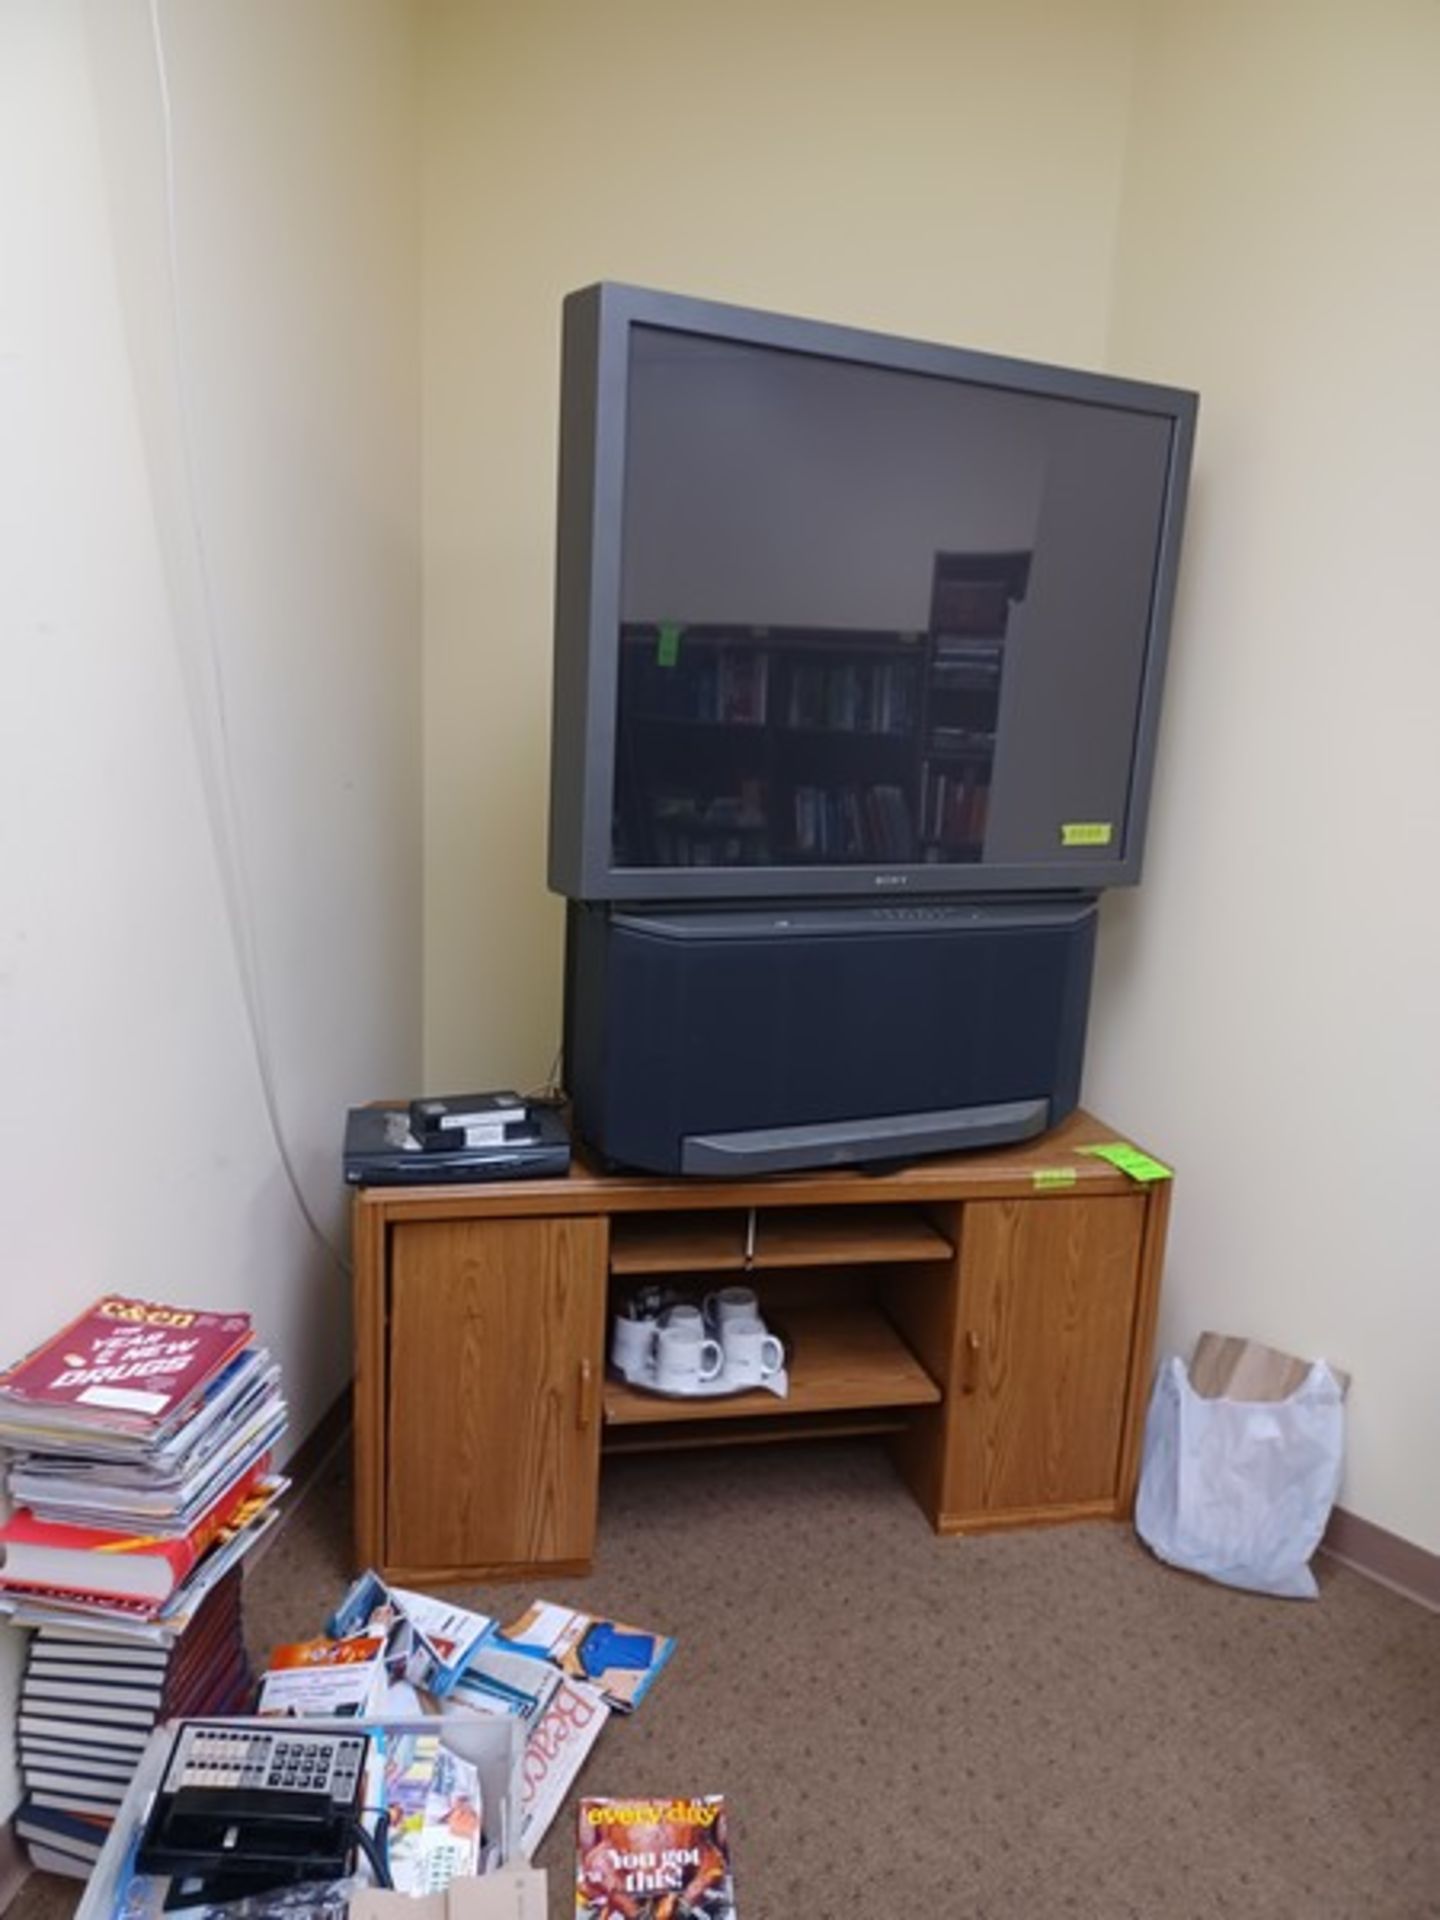 6 unit miscellaneous office furniture/items: 1 credenza 67"W x 21.5"Dx28.5"H / 1 TV stand 60"Wx20. - Image 5 of 5